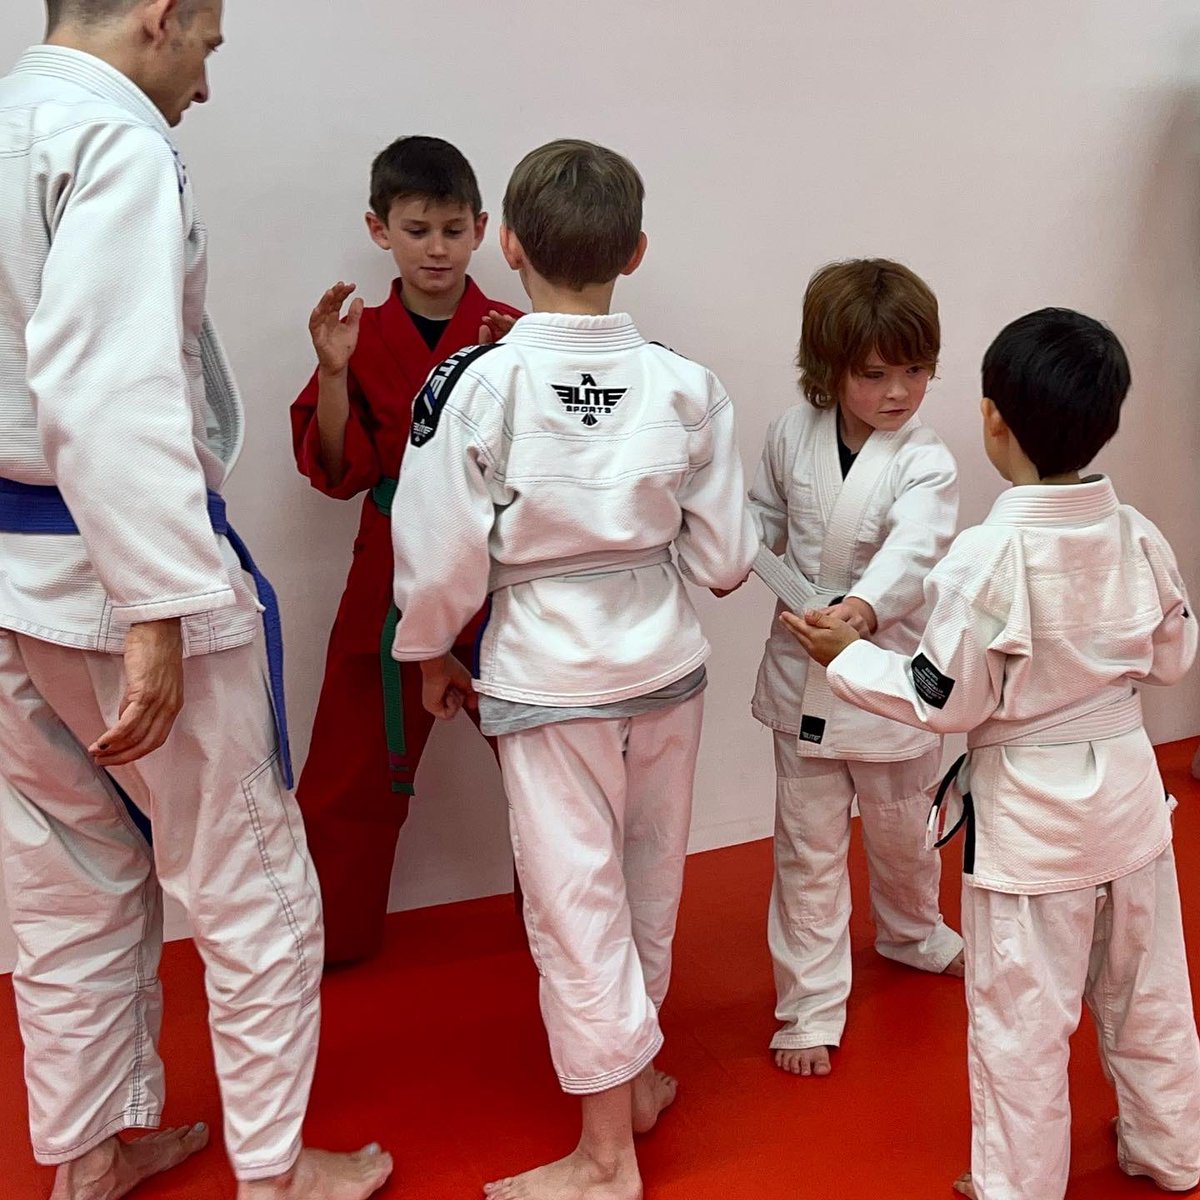 Little Ninjas in training, every Tuesday & Thursday at 5 pm and Saturdays at 11 am. Now accepting new students, ages 5-14. Verdevalleybjj.com #bjj #jiujitsu #jiujitsuforkids